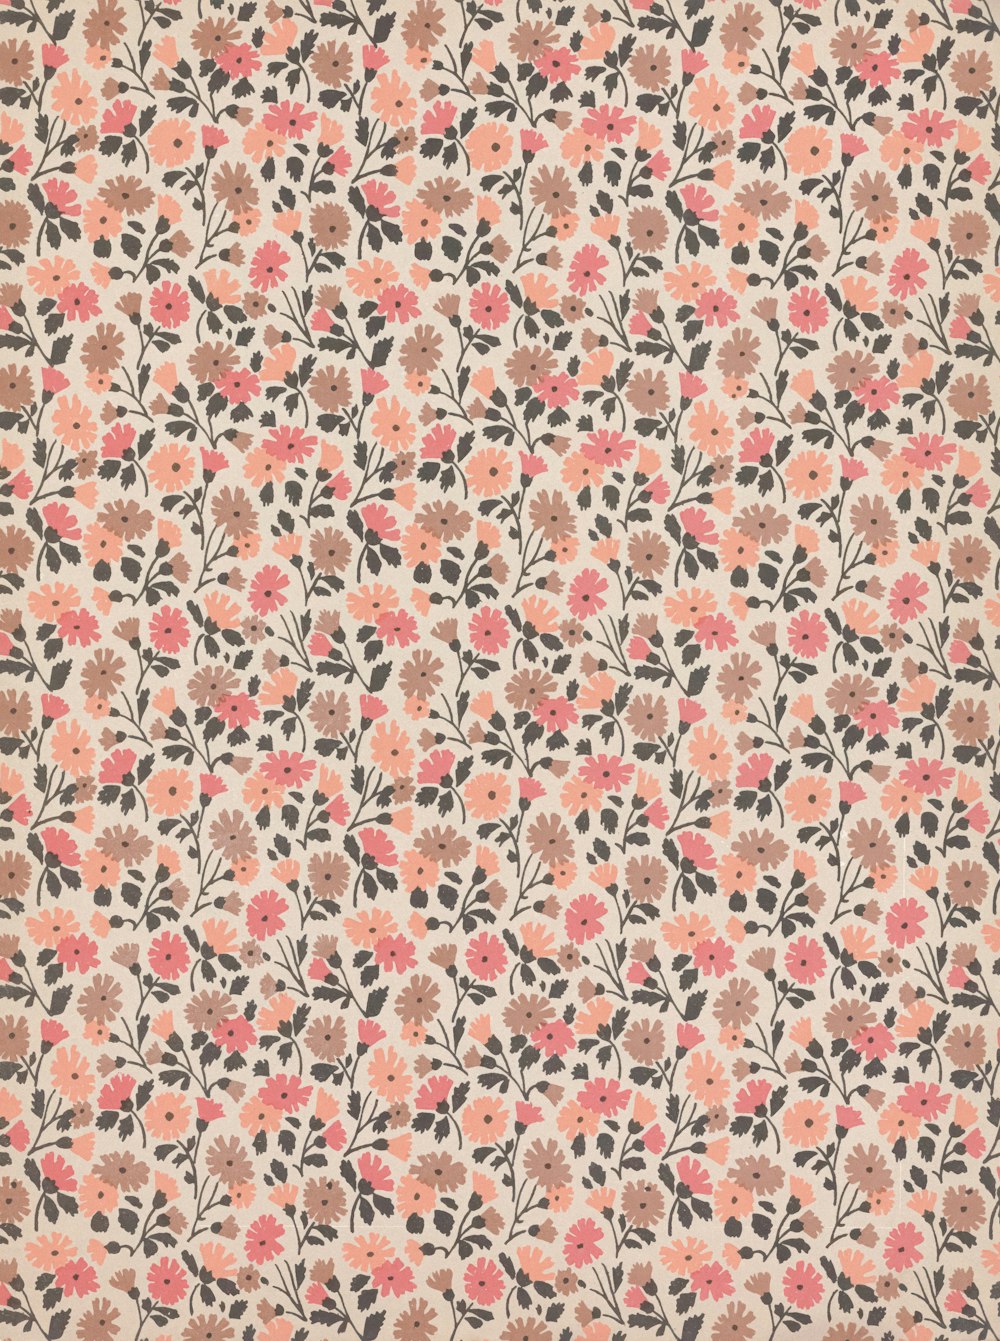 a floral pattern with pink flowers on a beige background